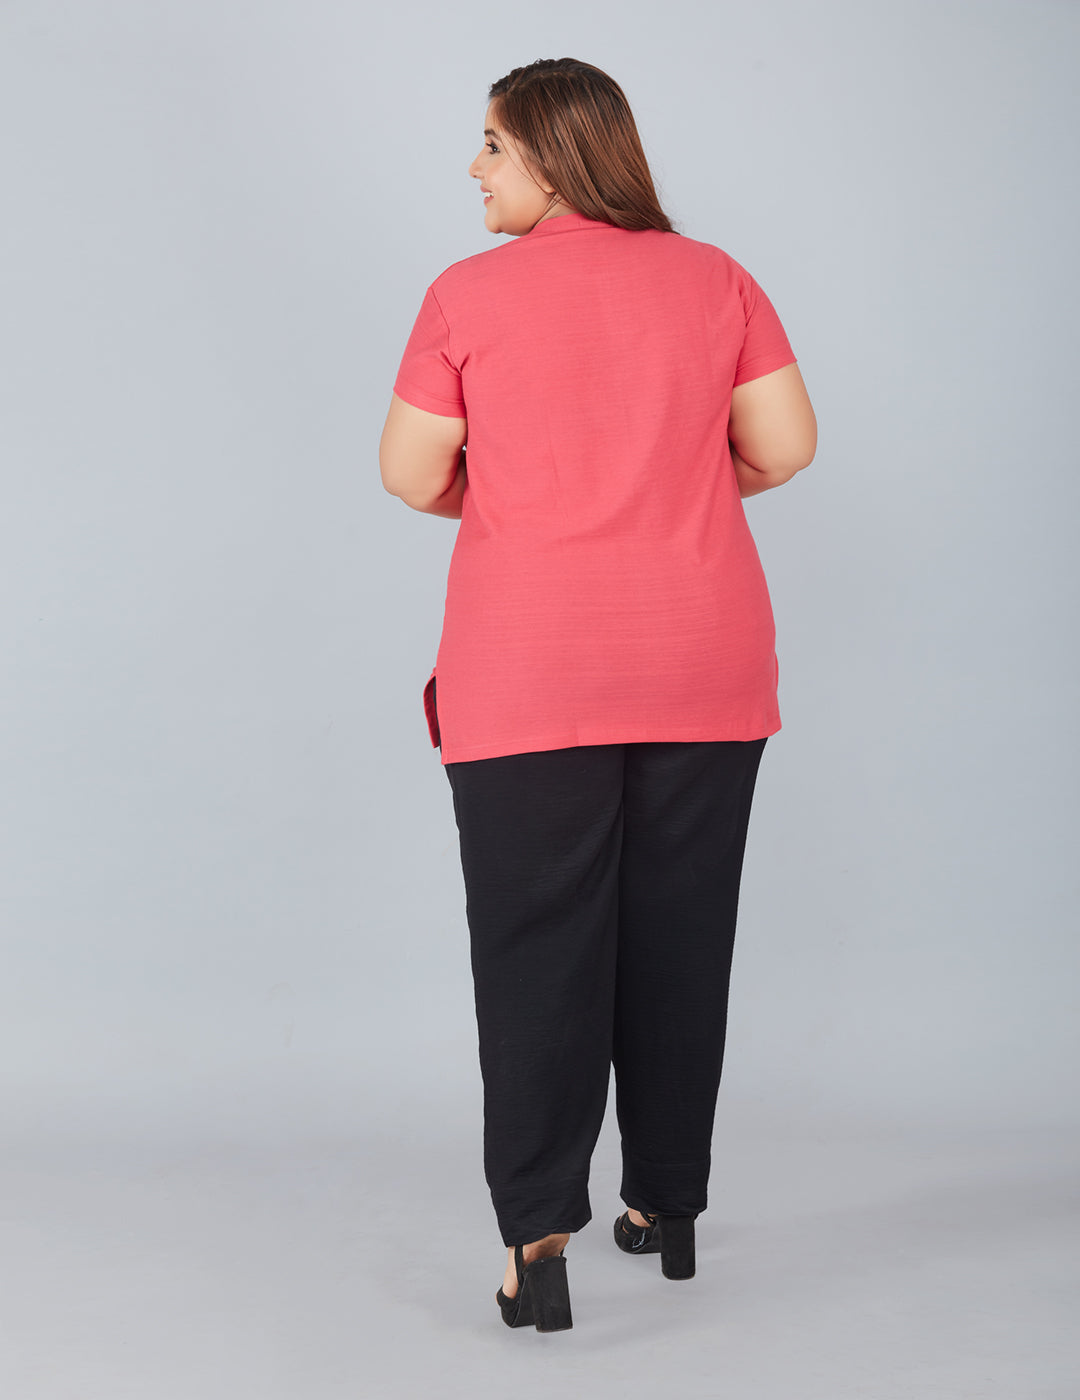 Plus Size Cotton T-shirts For Summer - Pink At Best Prices